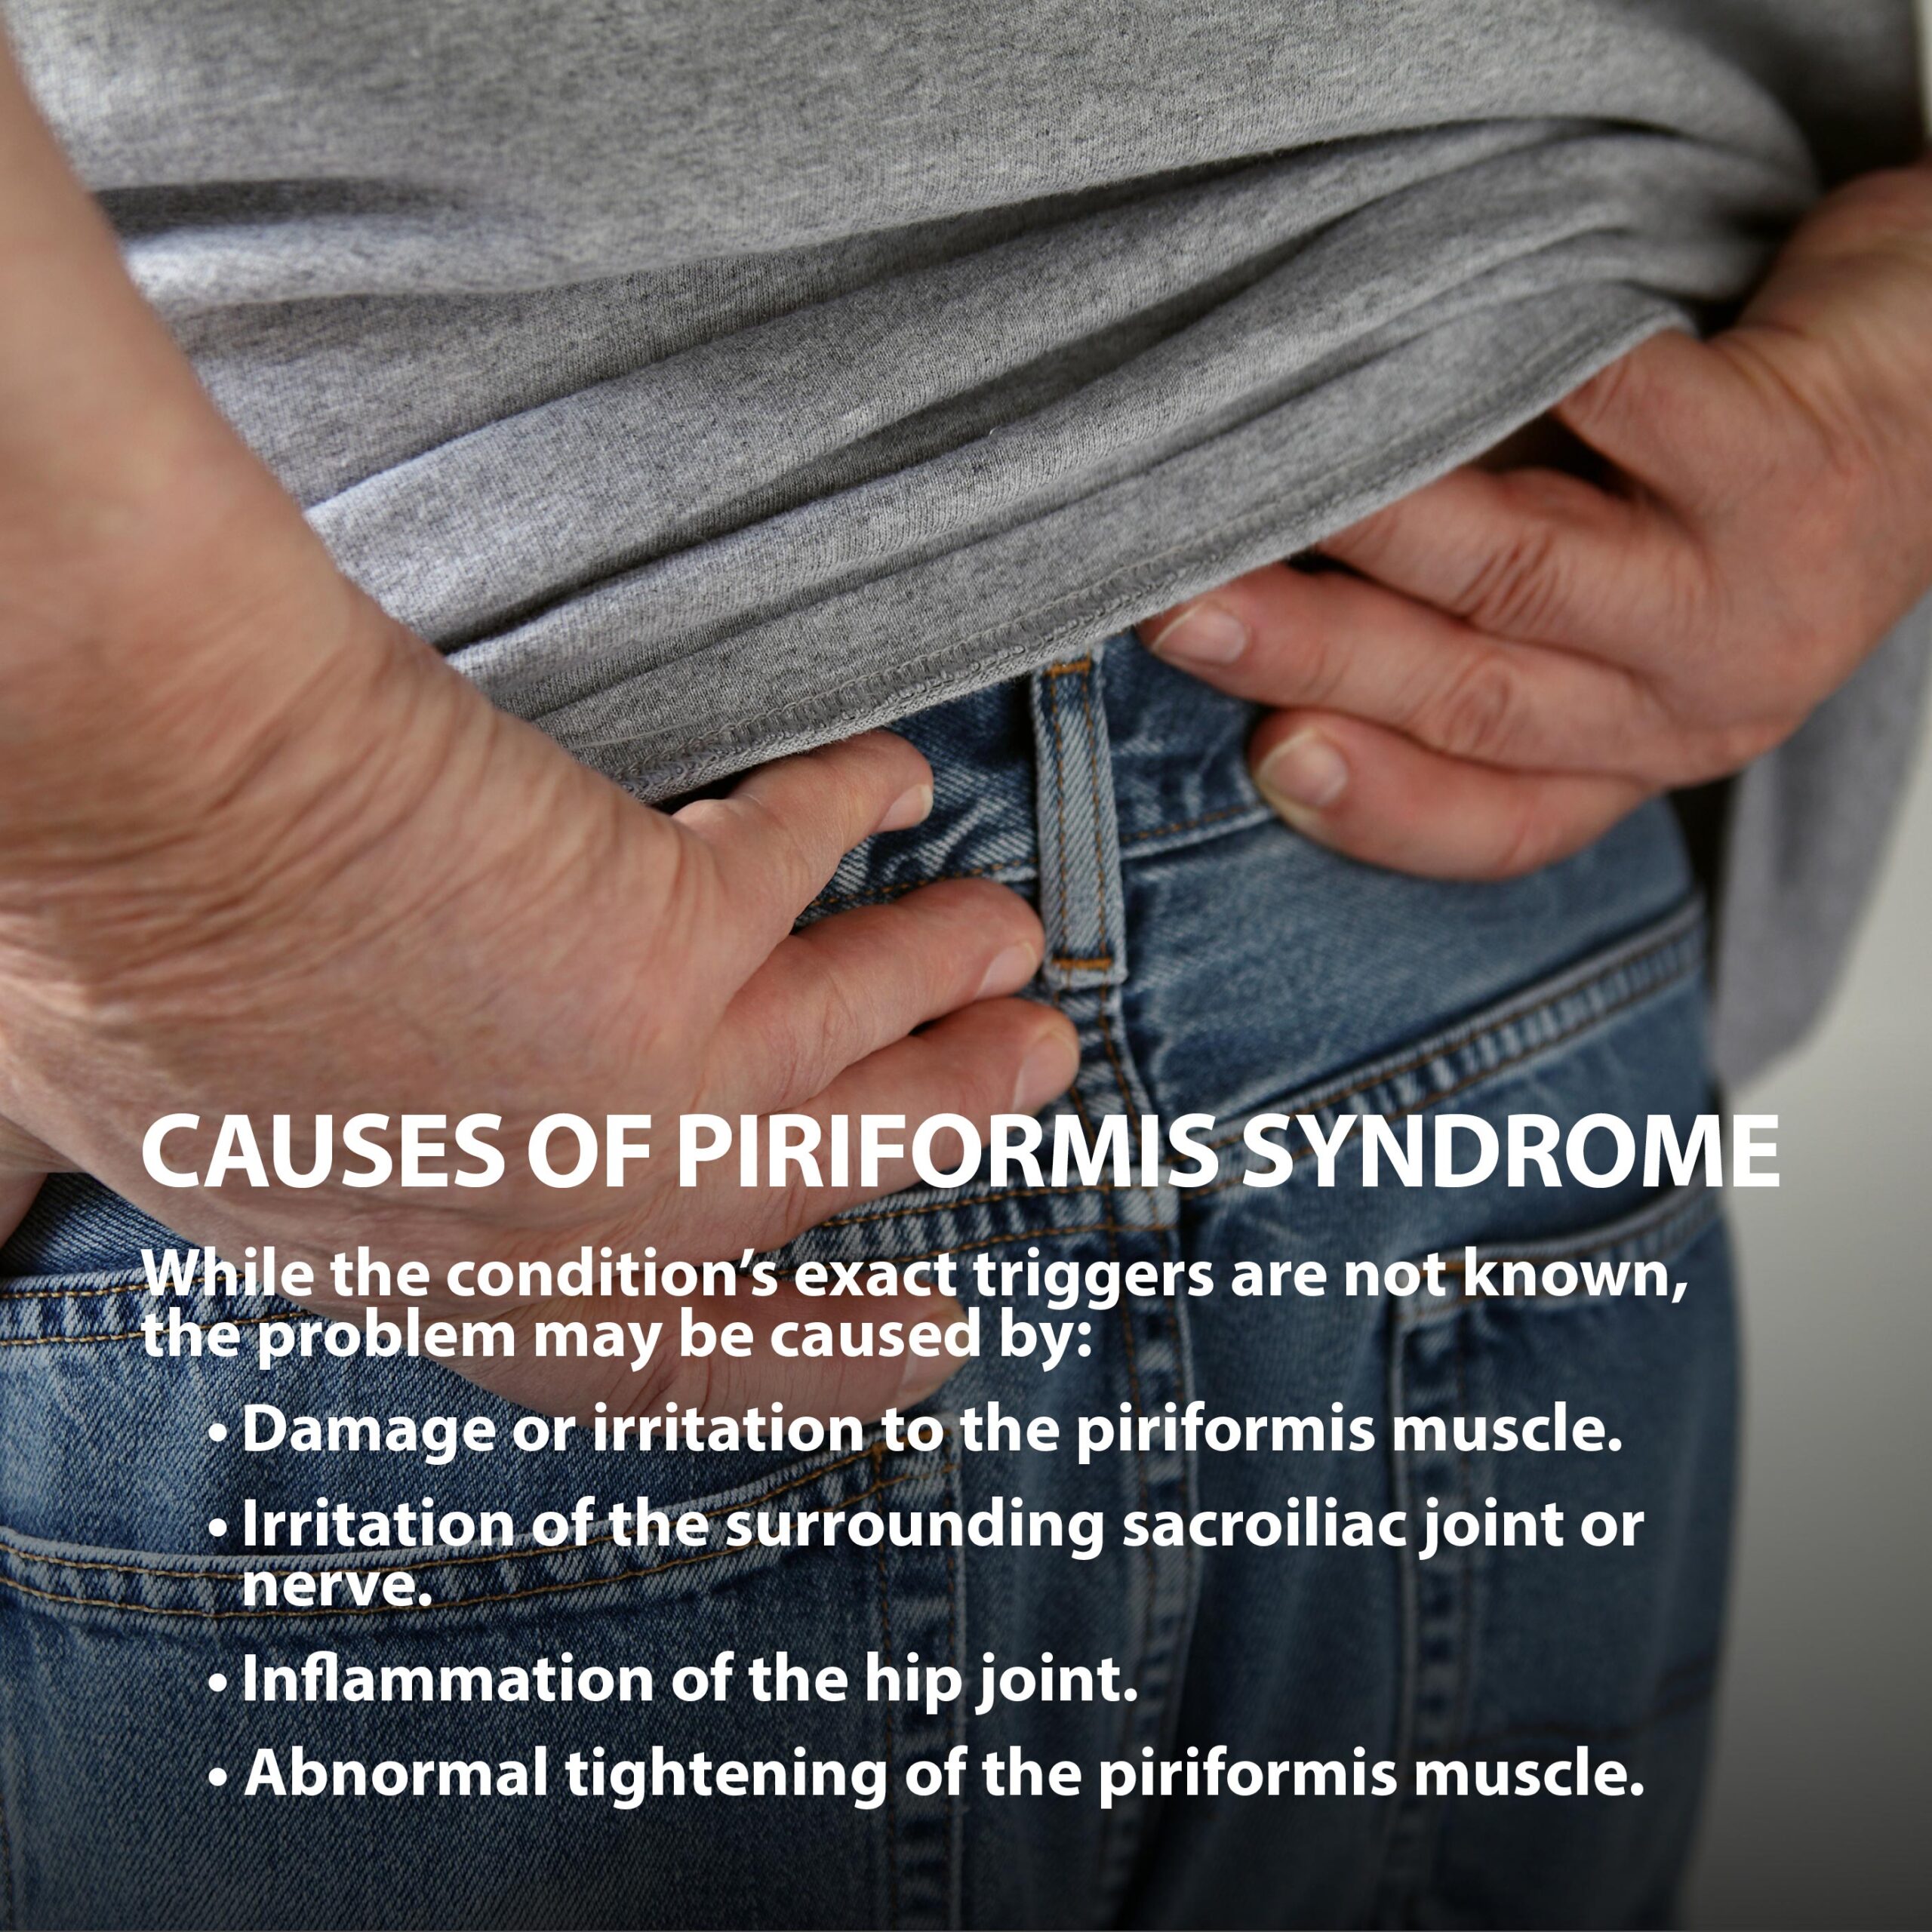 Piriformus Syndrome Information and Treatments